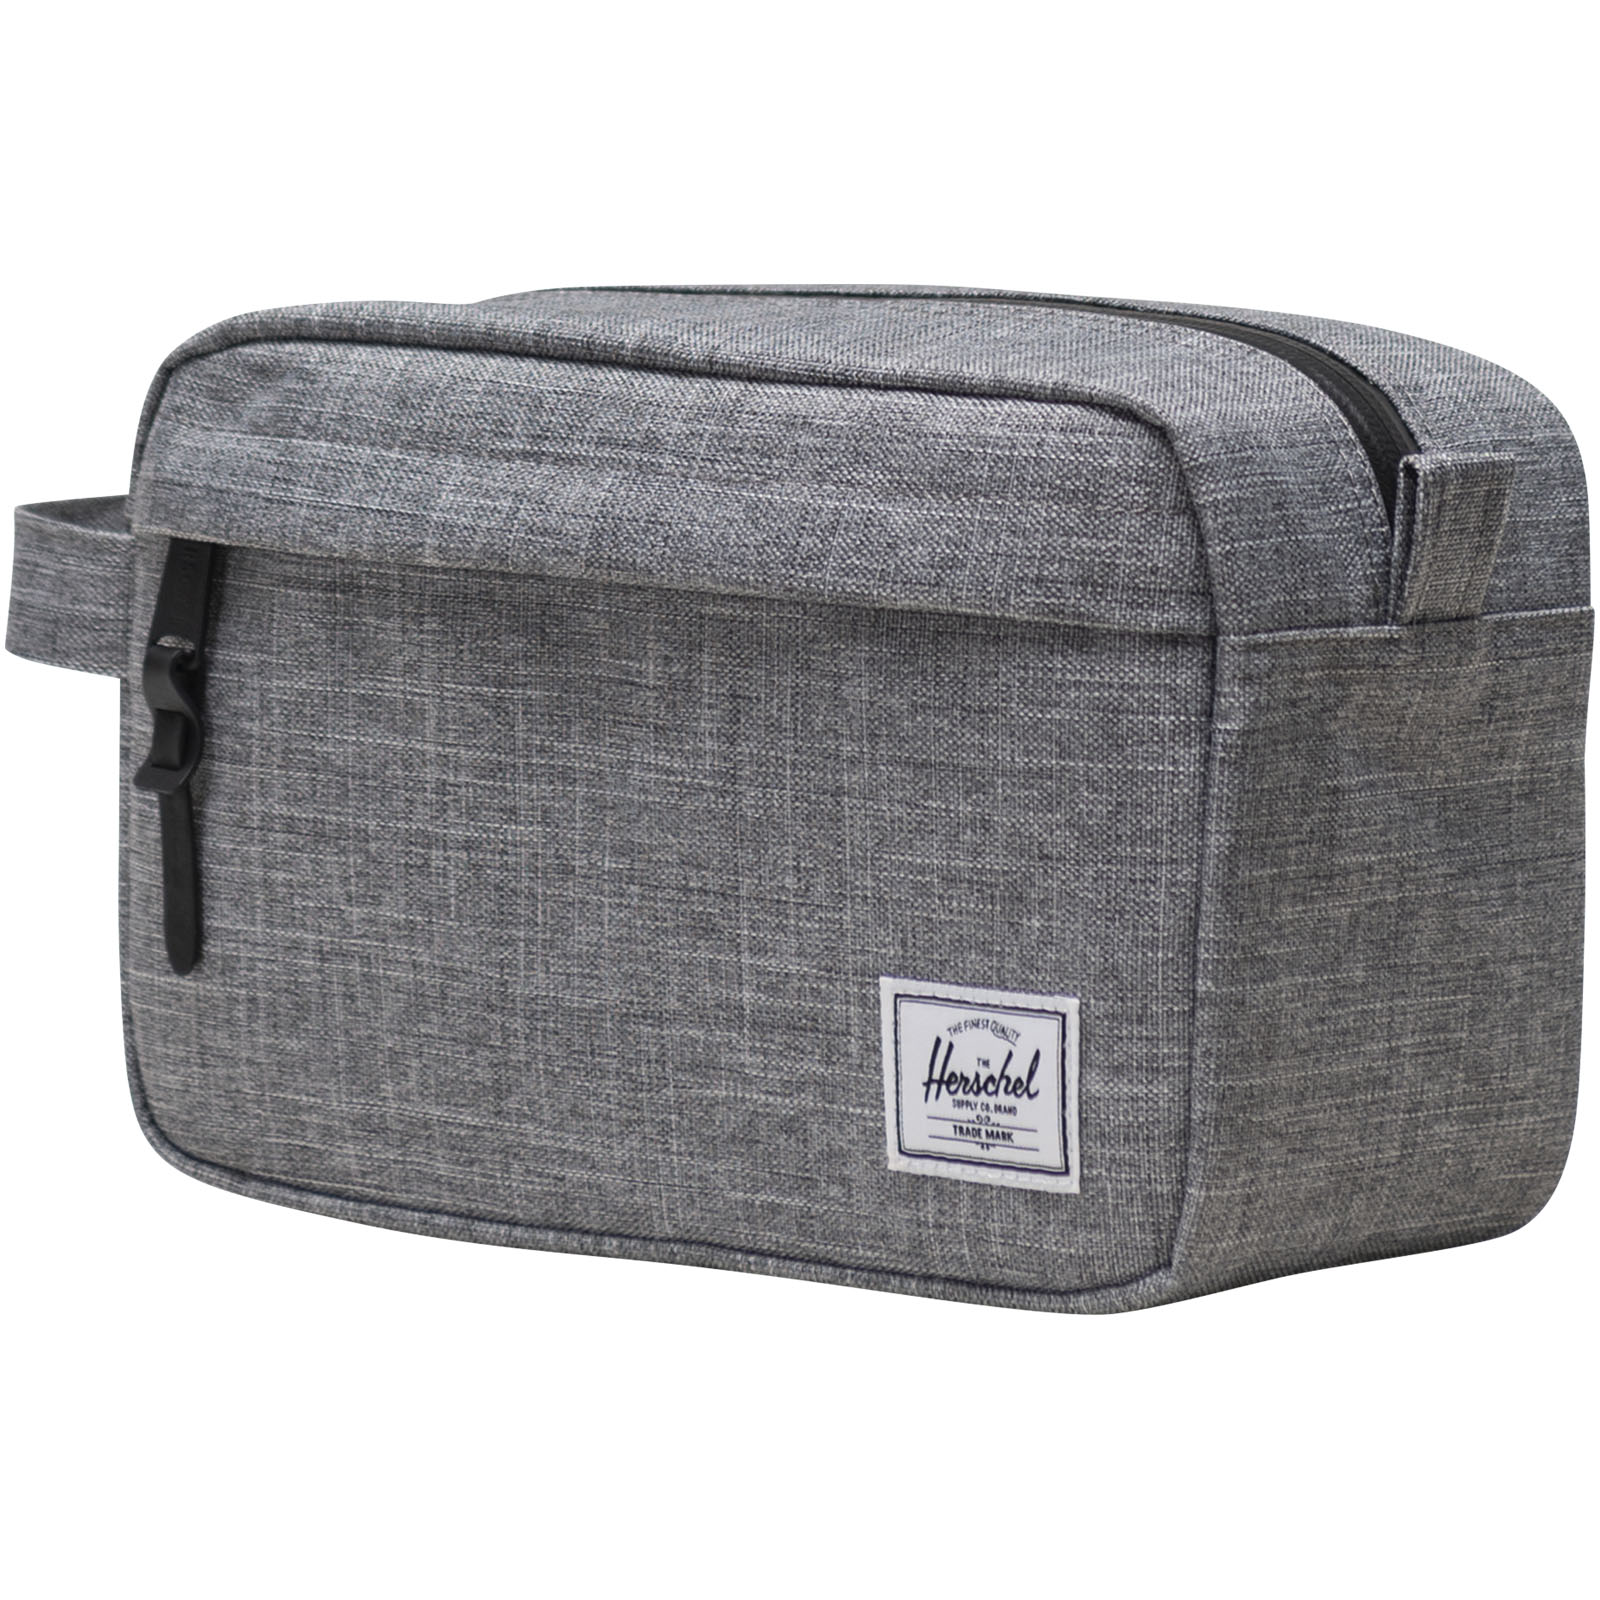 Advertising Toiletry Bags - Herschel Chapter recycled travel kit